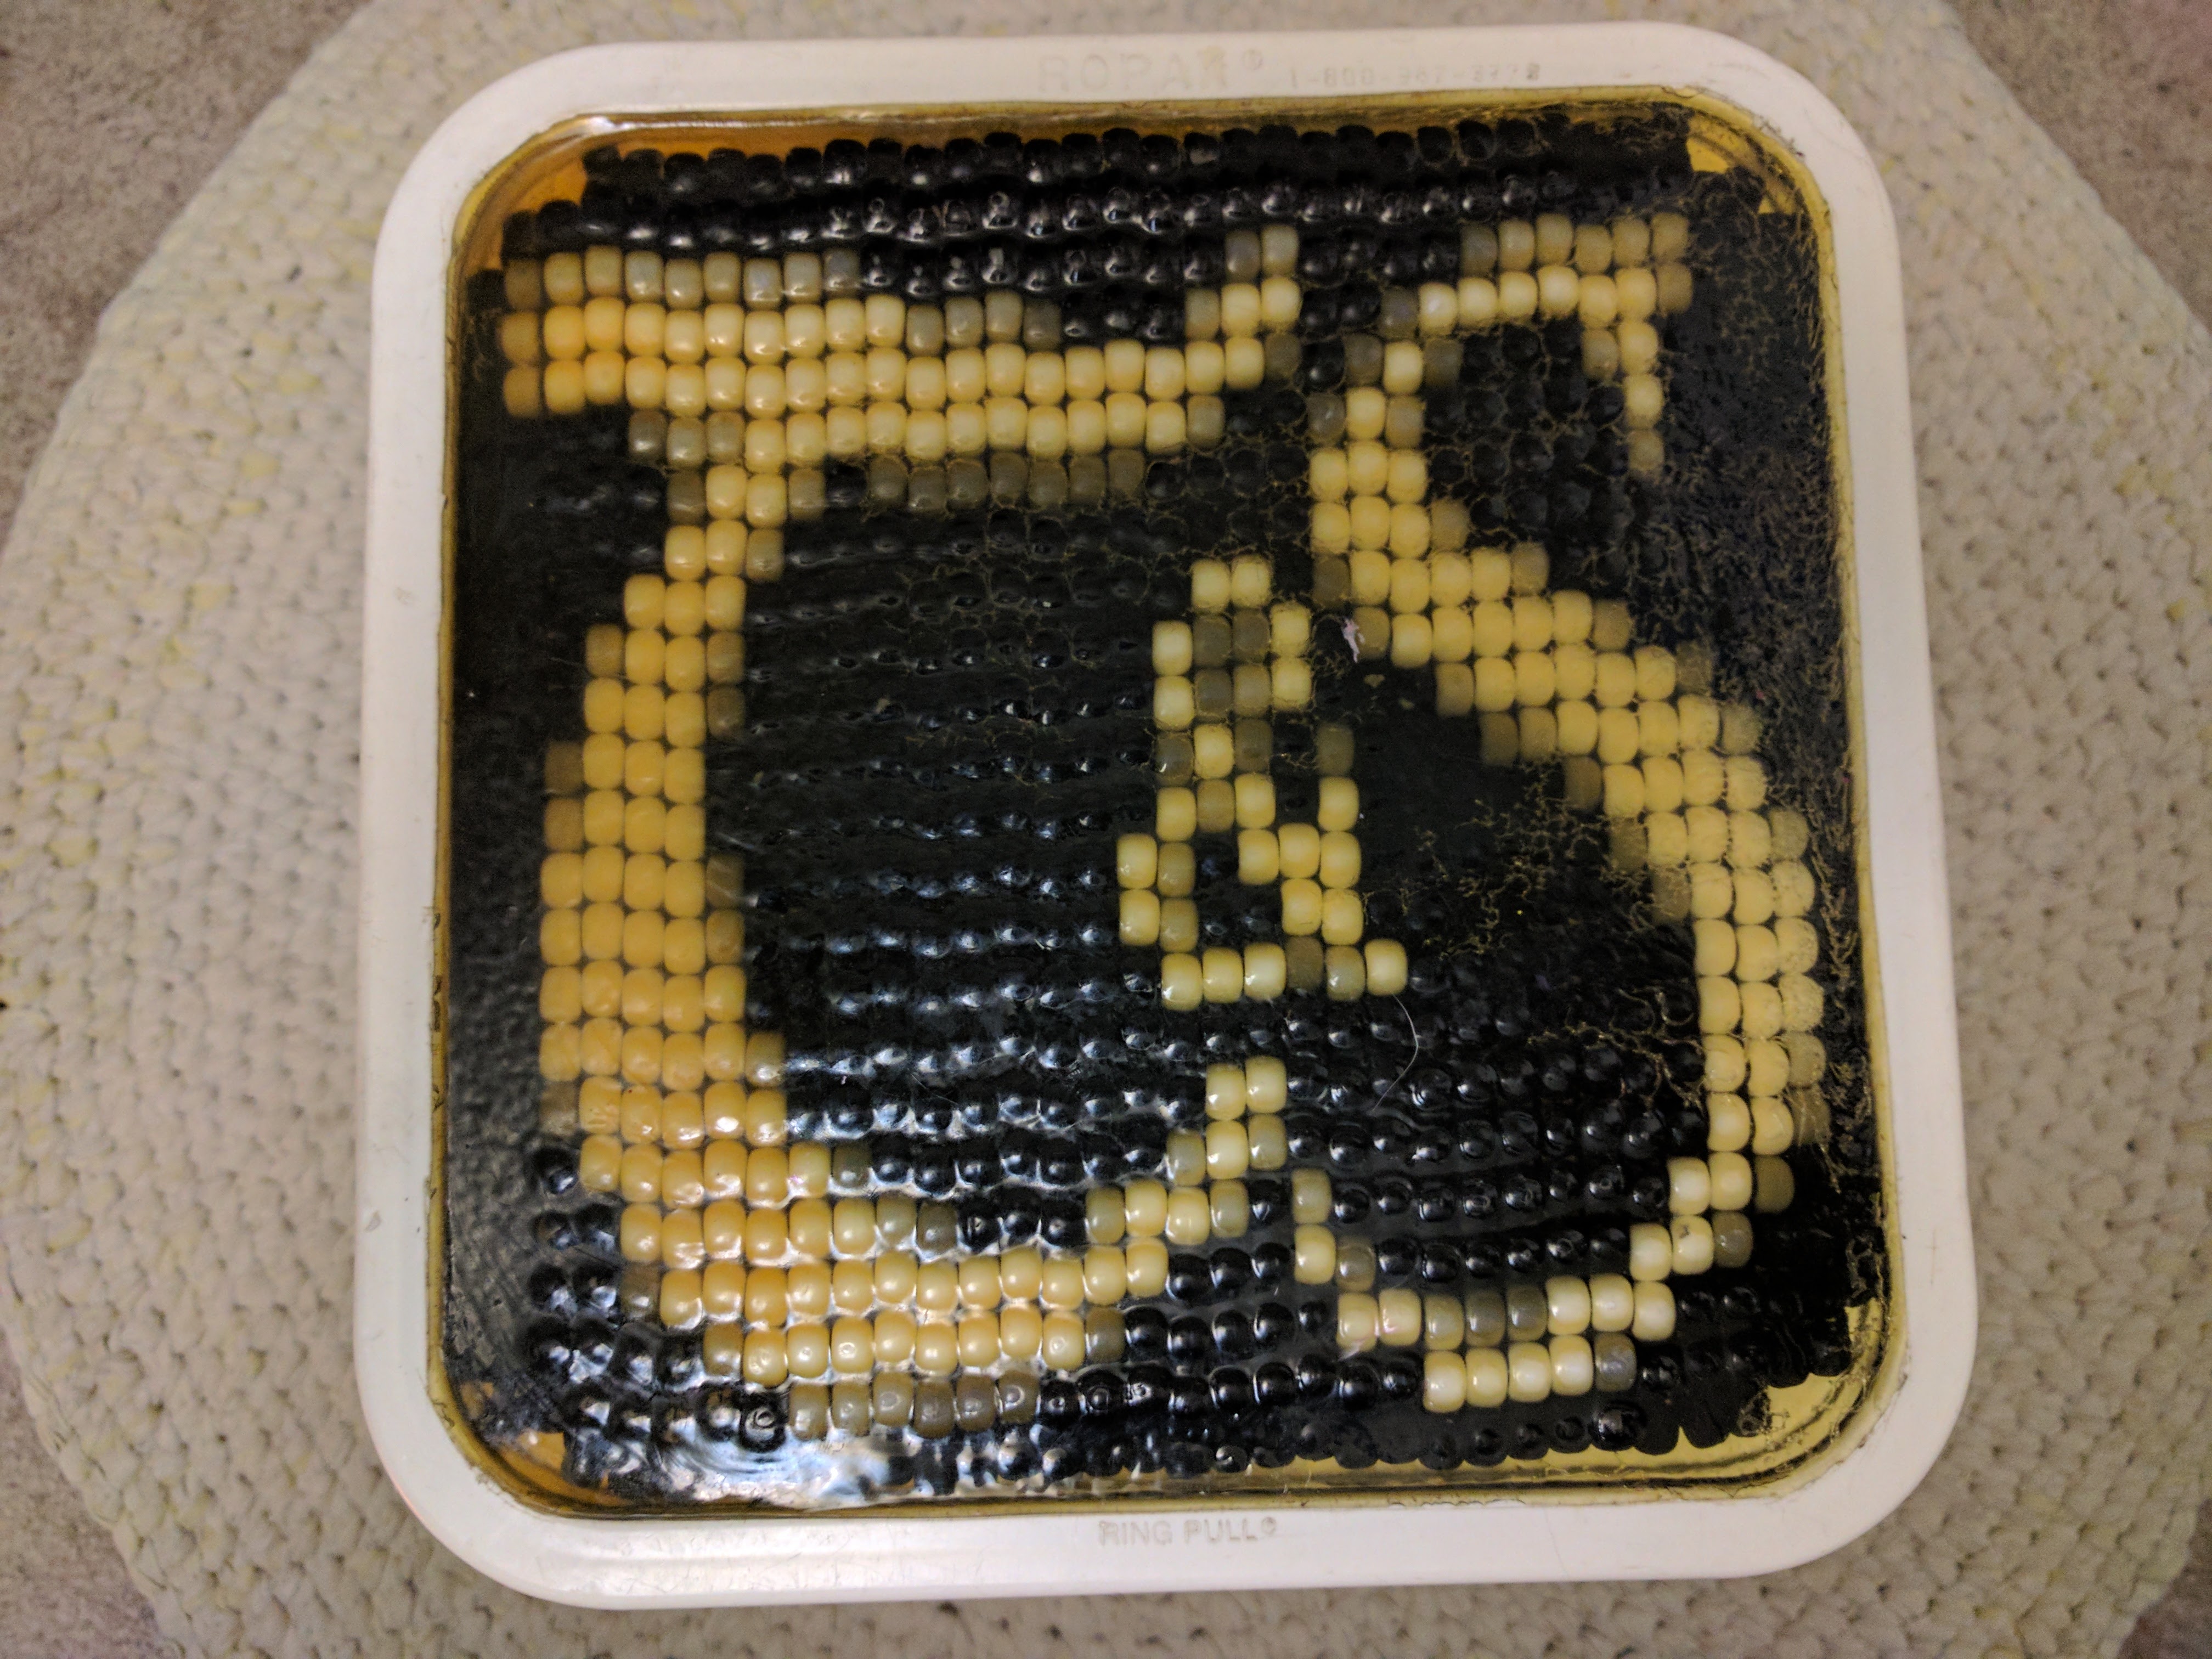 The Thingies and Stuff logo, made from beads and encased.